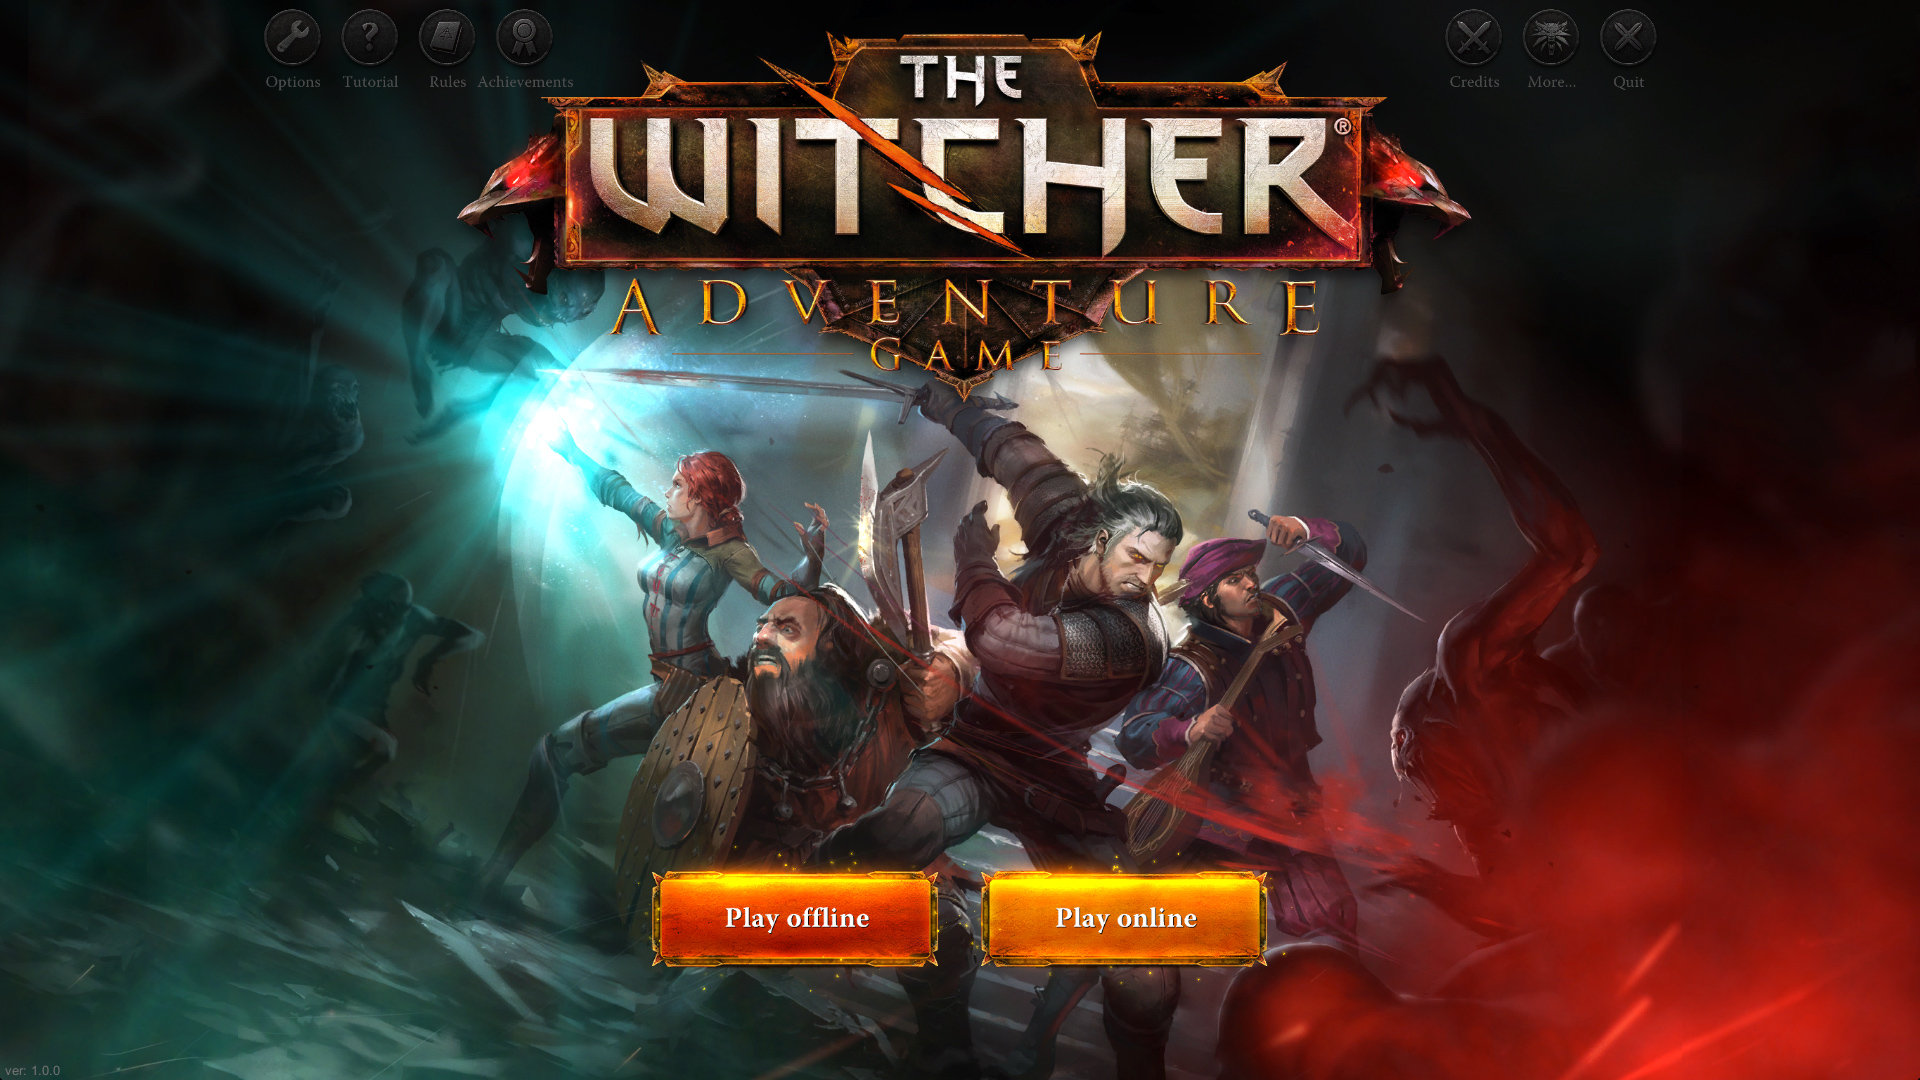 The Witcher Adventure Game - Metacritic